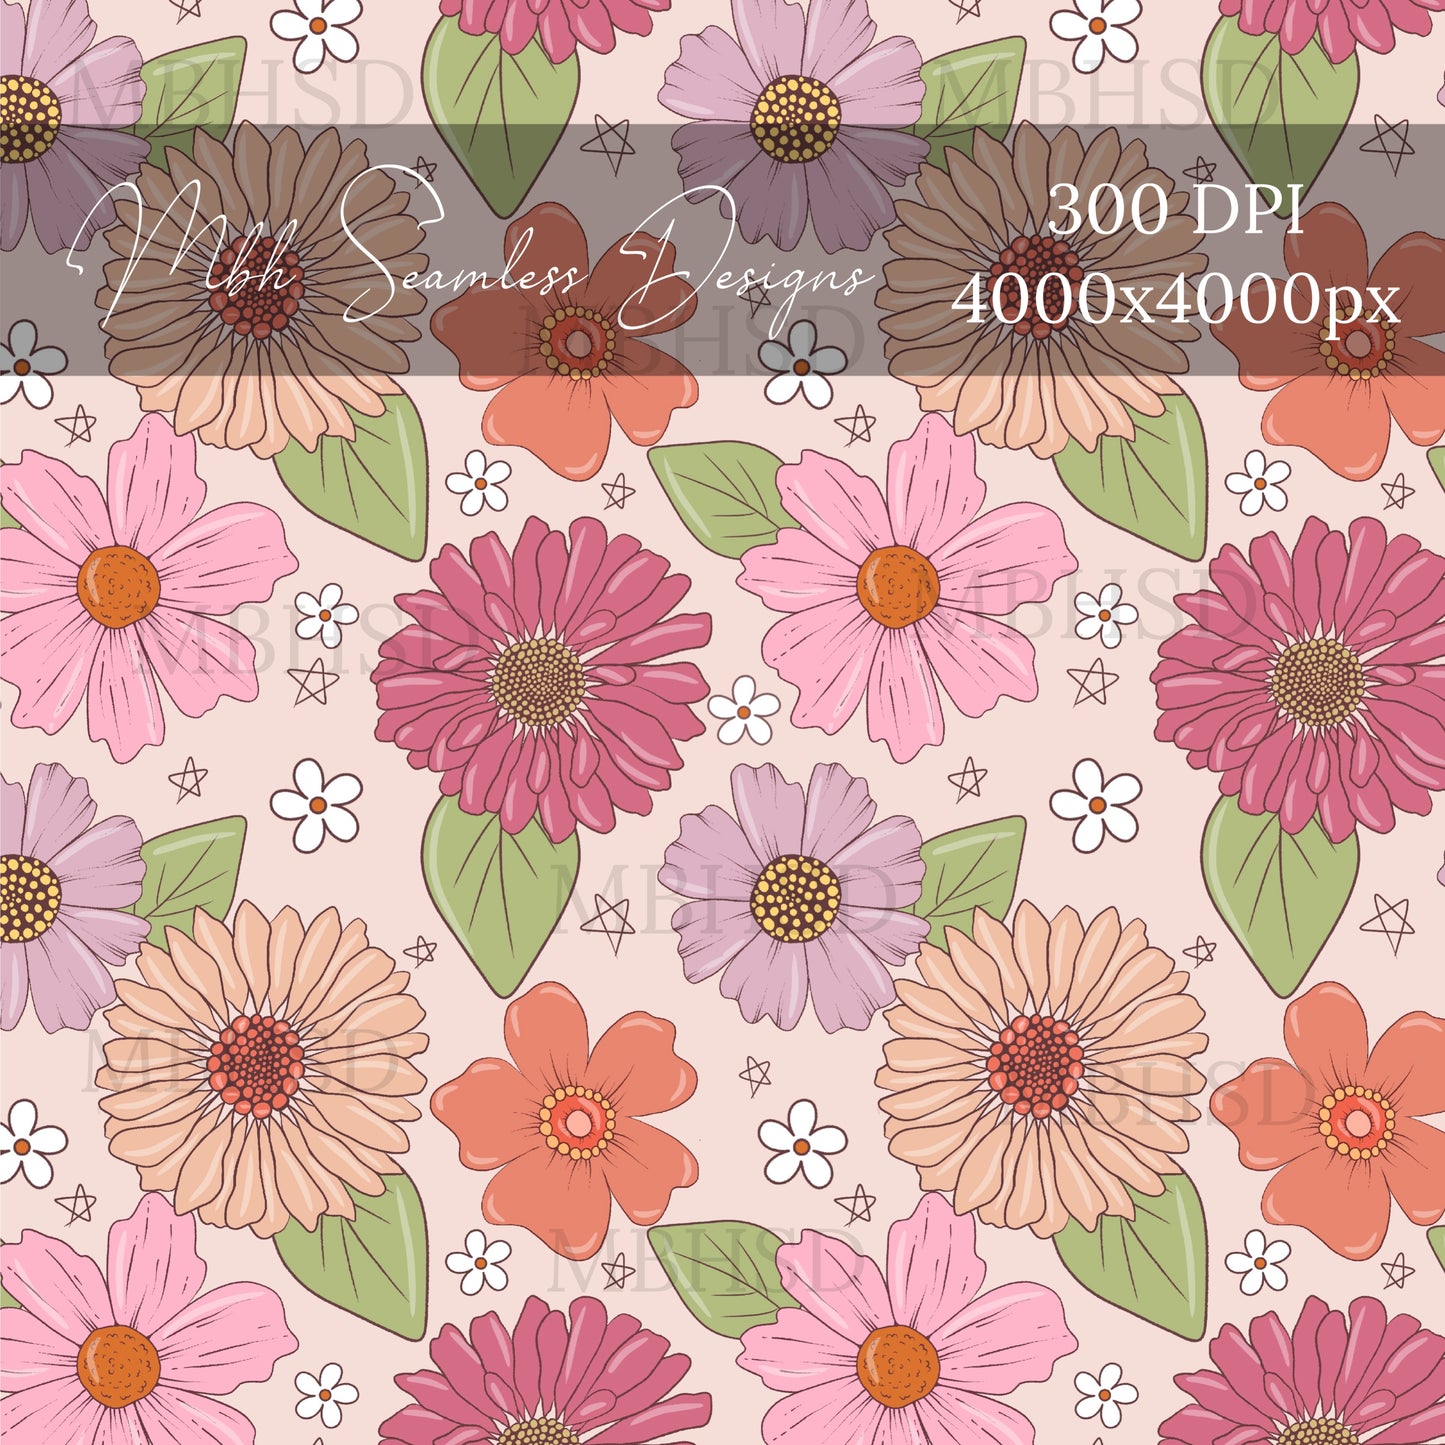 Starry Fall Floral ASSORTED COLORWAYS Seamless Pattern